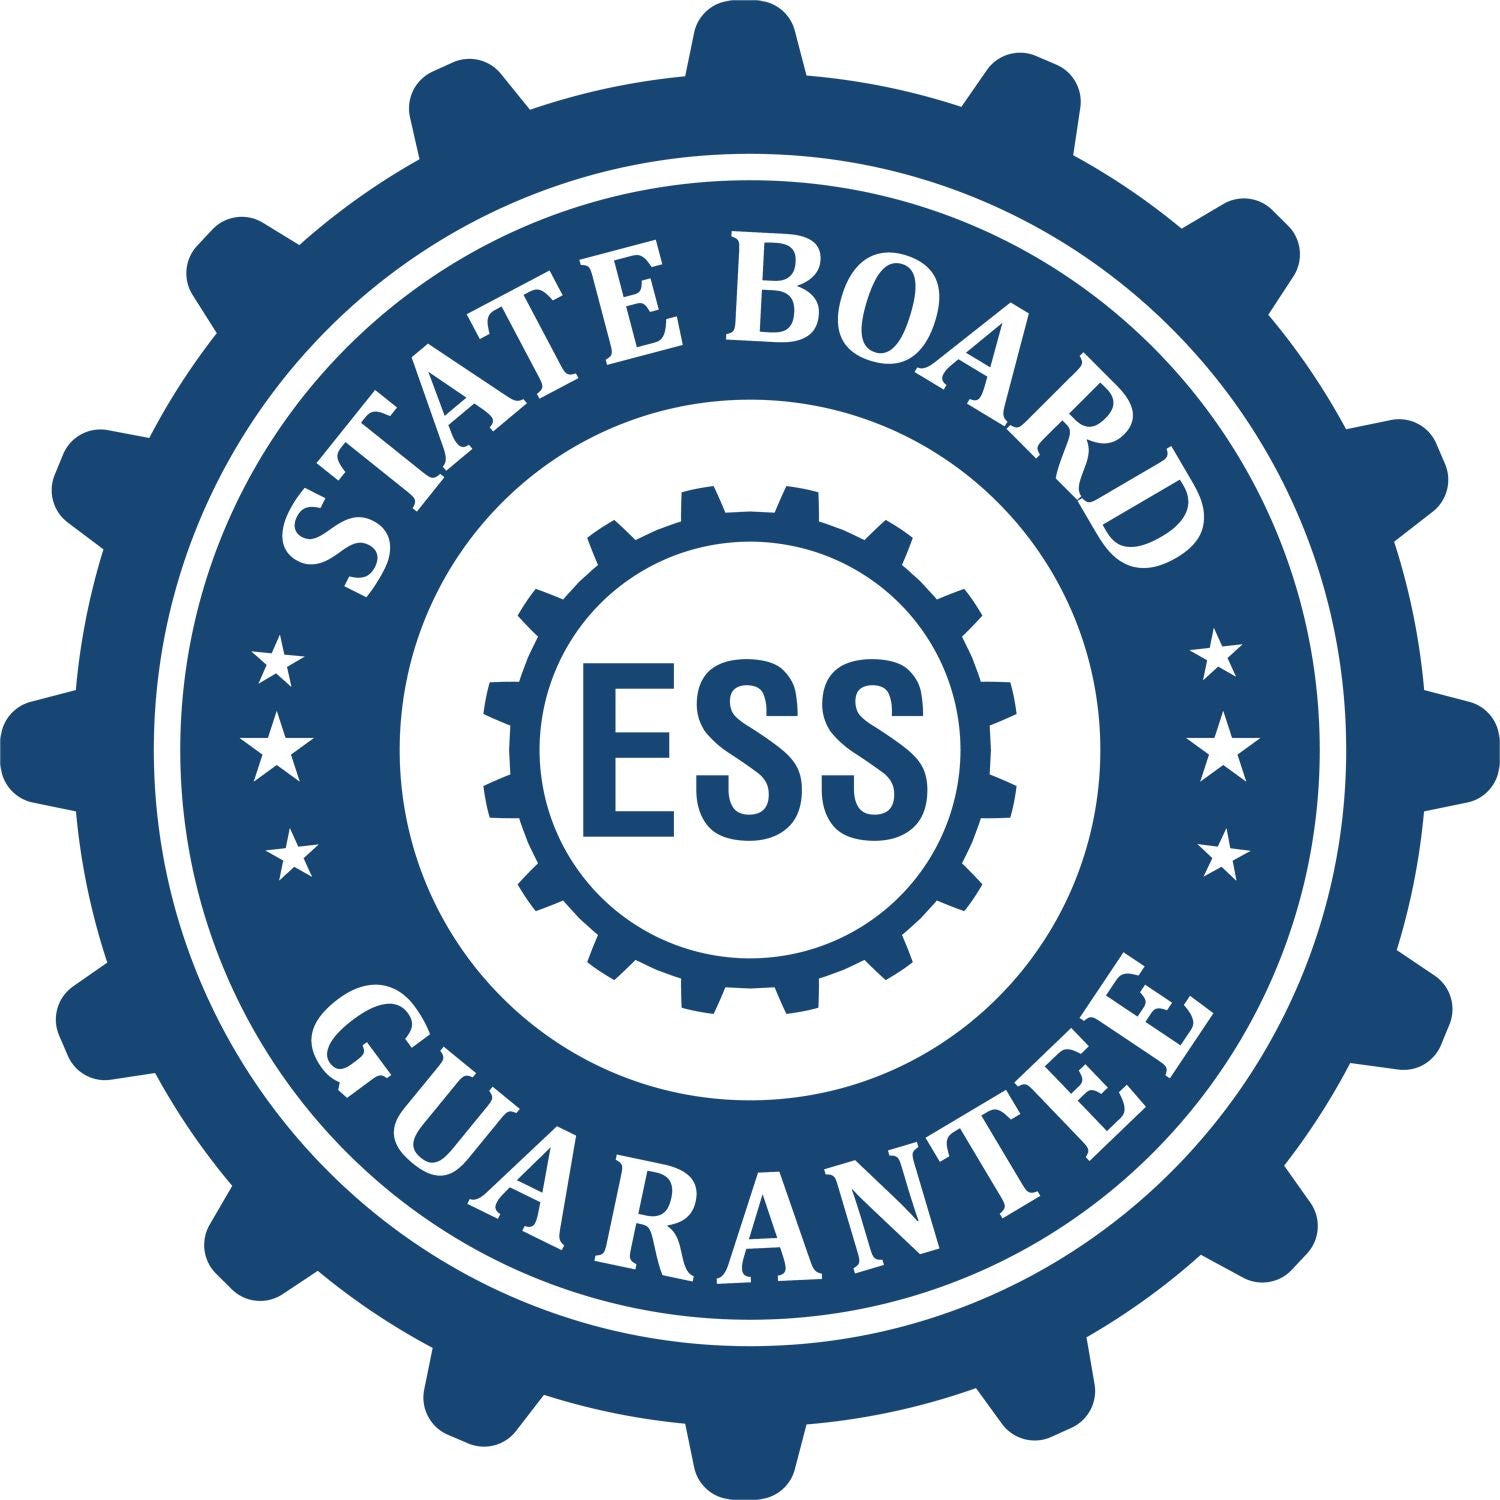 An emblem in a gear shape illustrating a state board guarantee for the Digital Oregon PE Stamp and Electronic Seal for Oregon Engineer product.